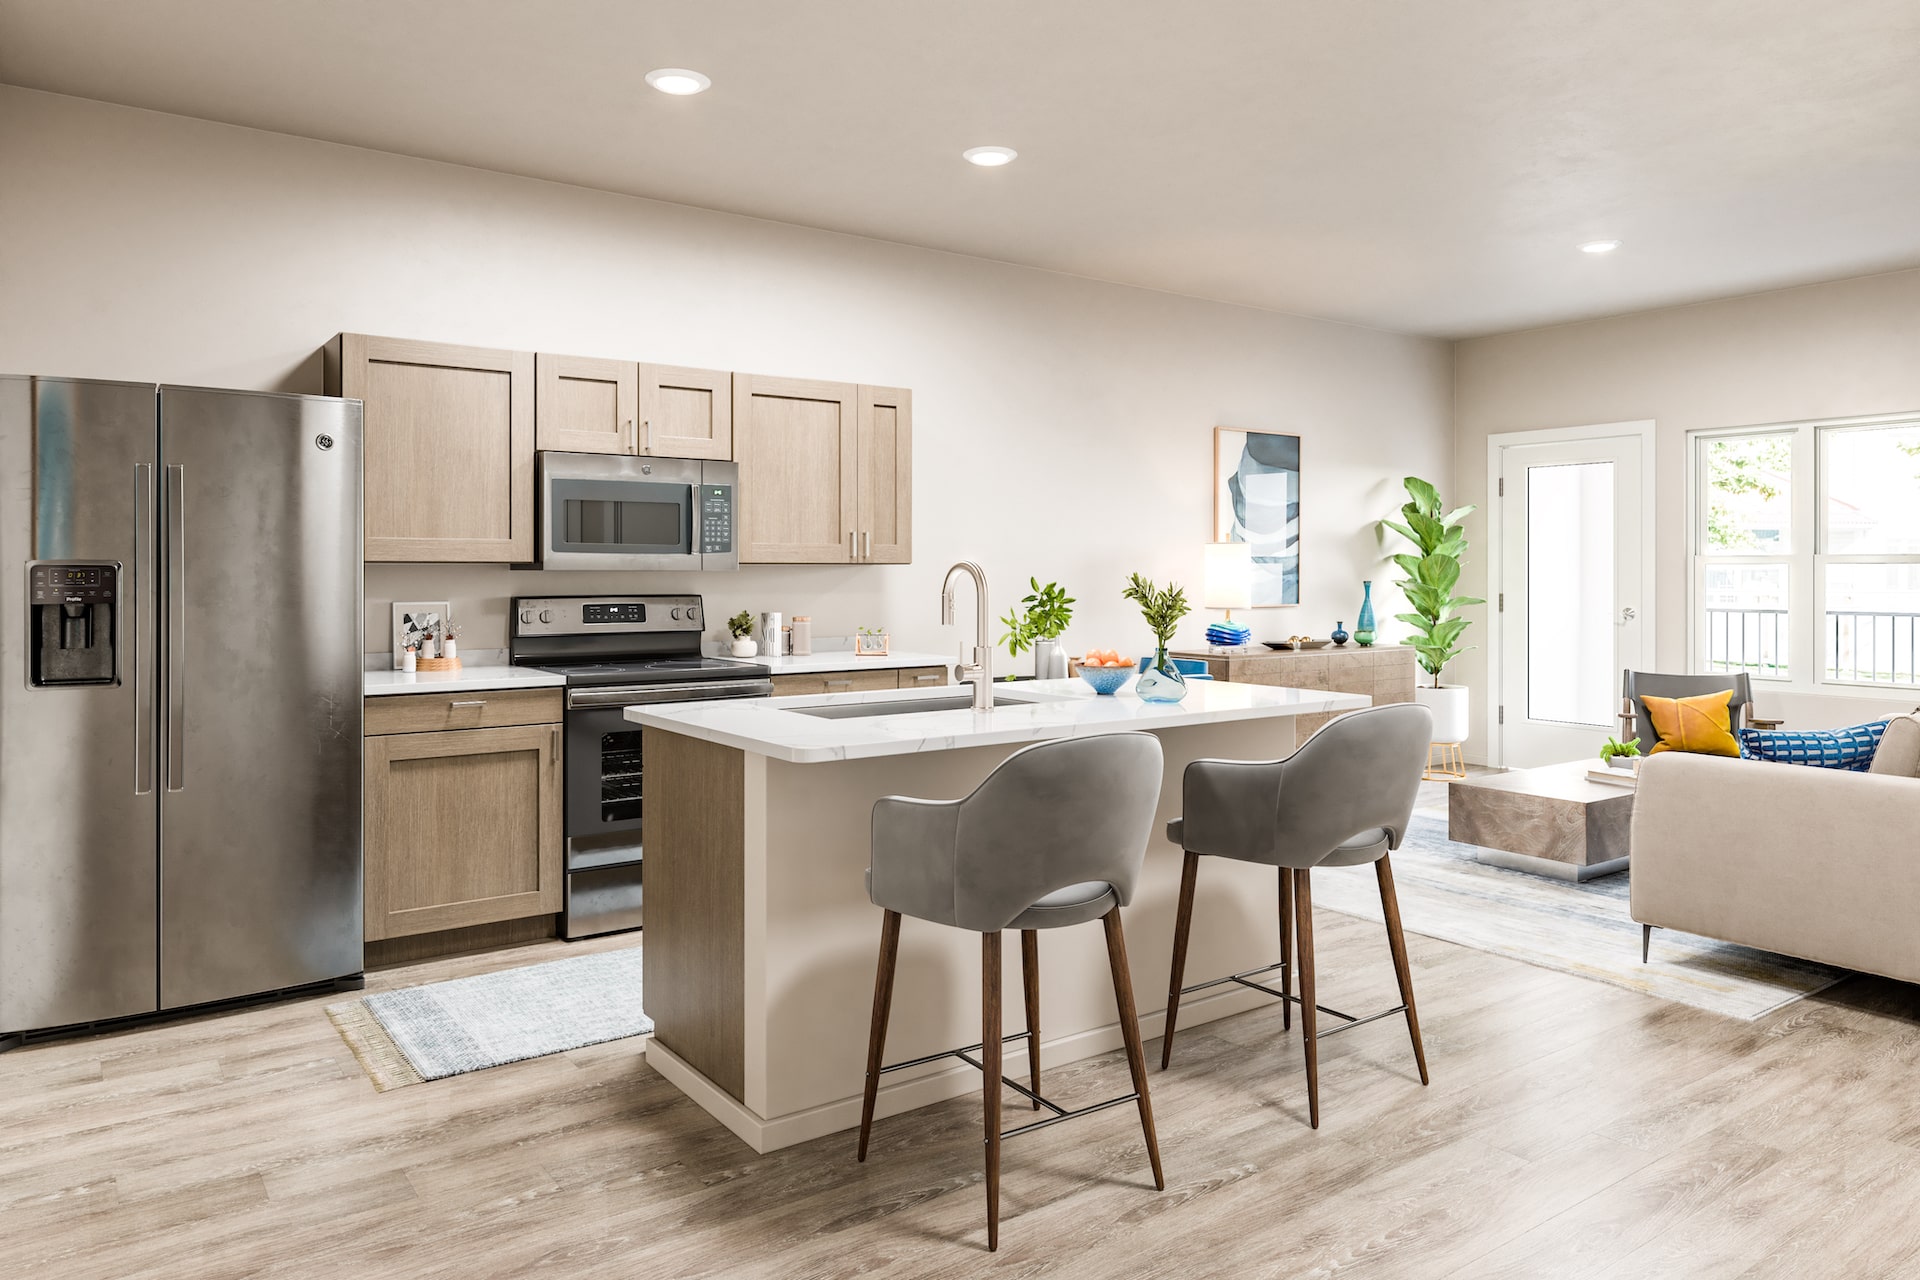 Interior photo of Unit A kitchen with island